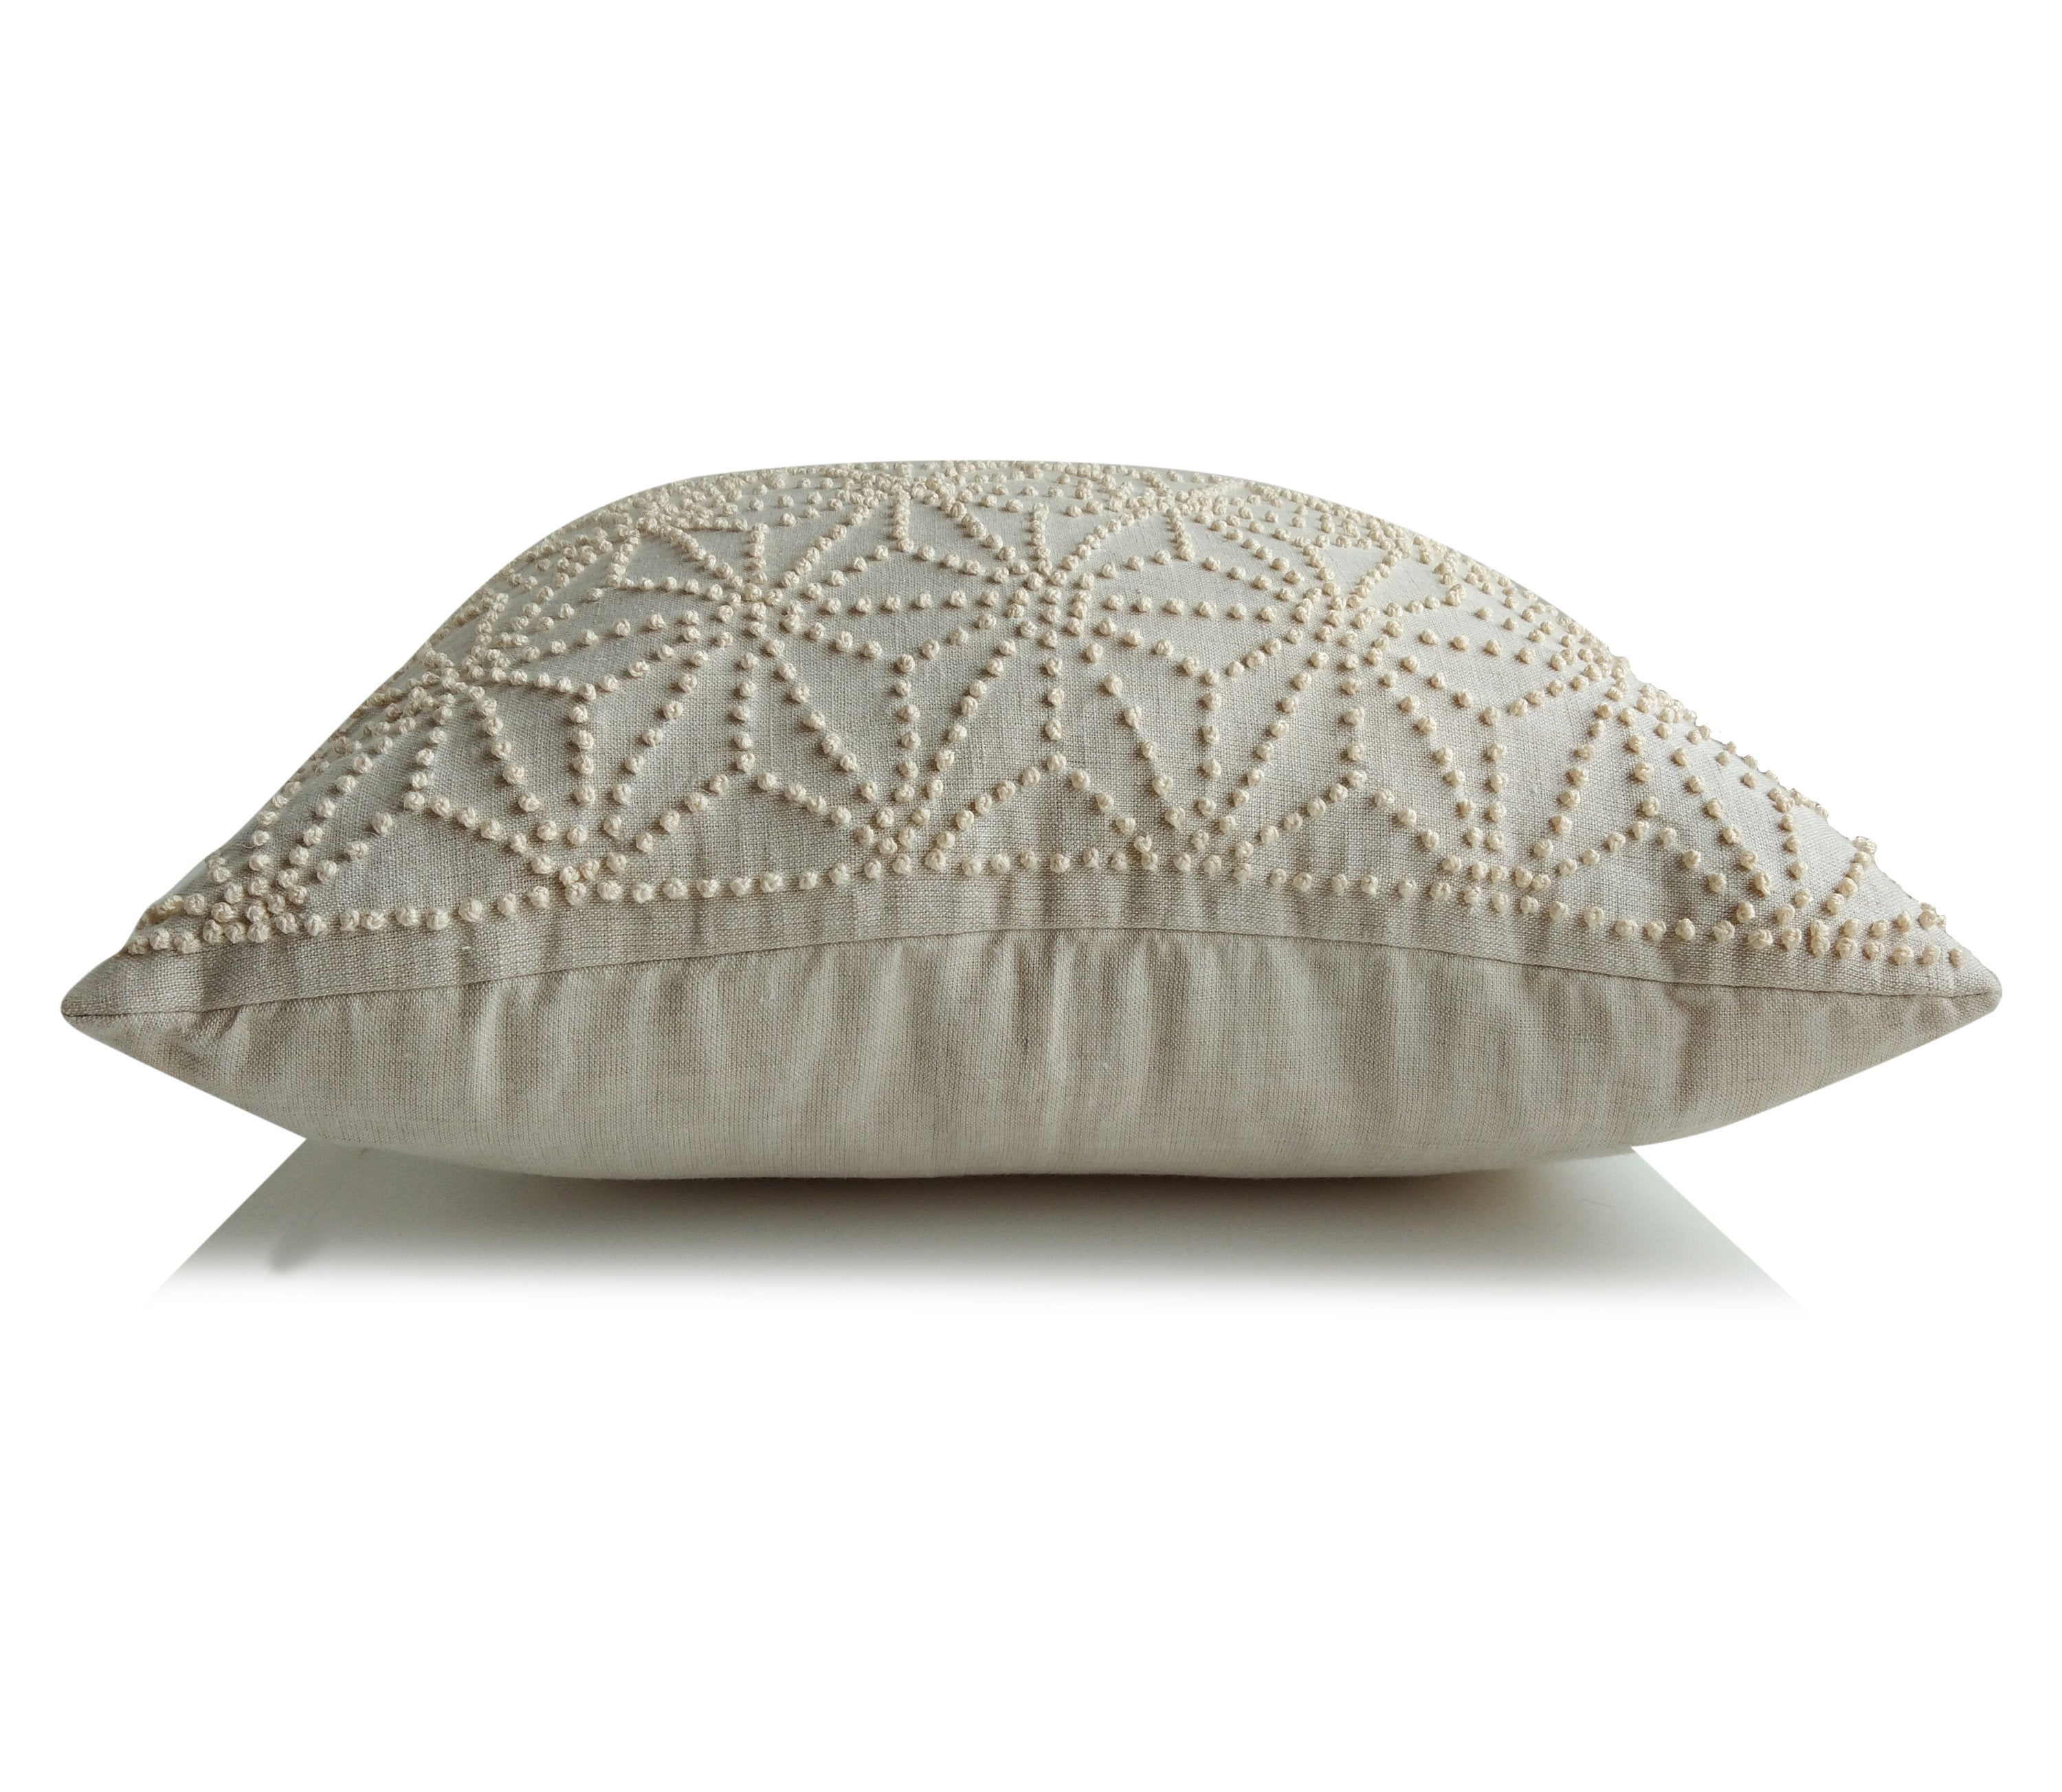 Amore Beaute throw pillow case has the traditional Hemp leaf (Asa no Ha in Japanese) pattern that symbolizes health as it grows fast and straight. 